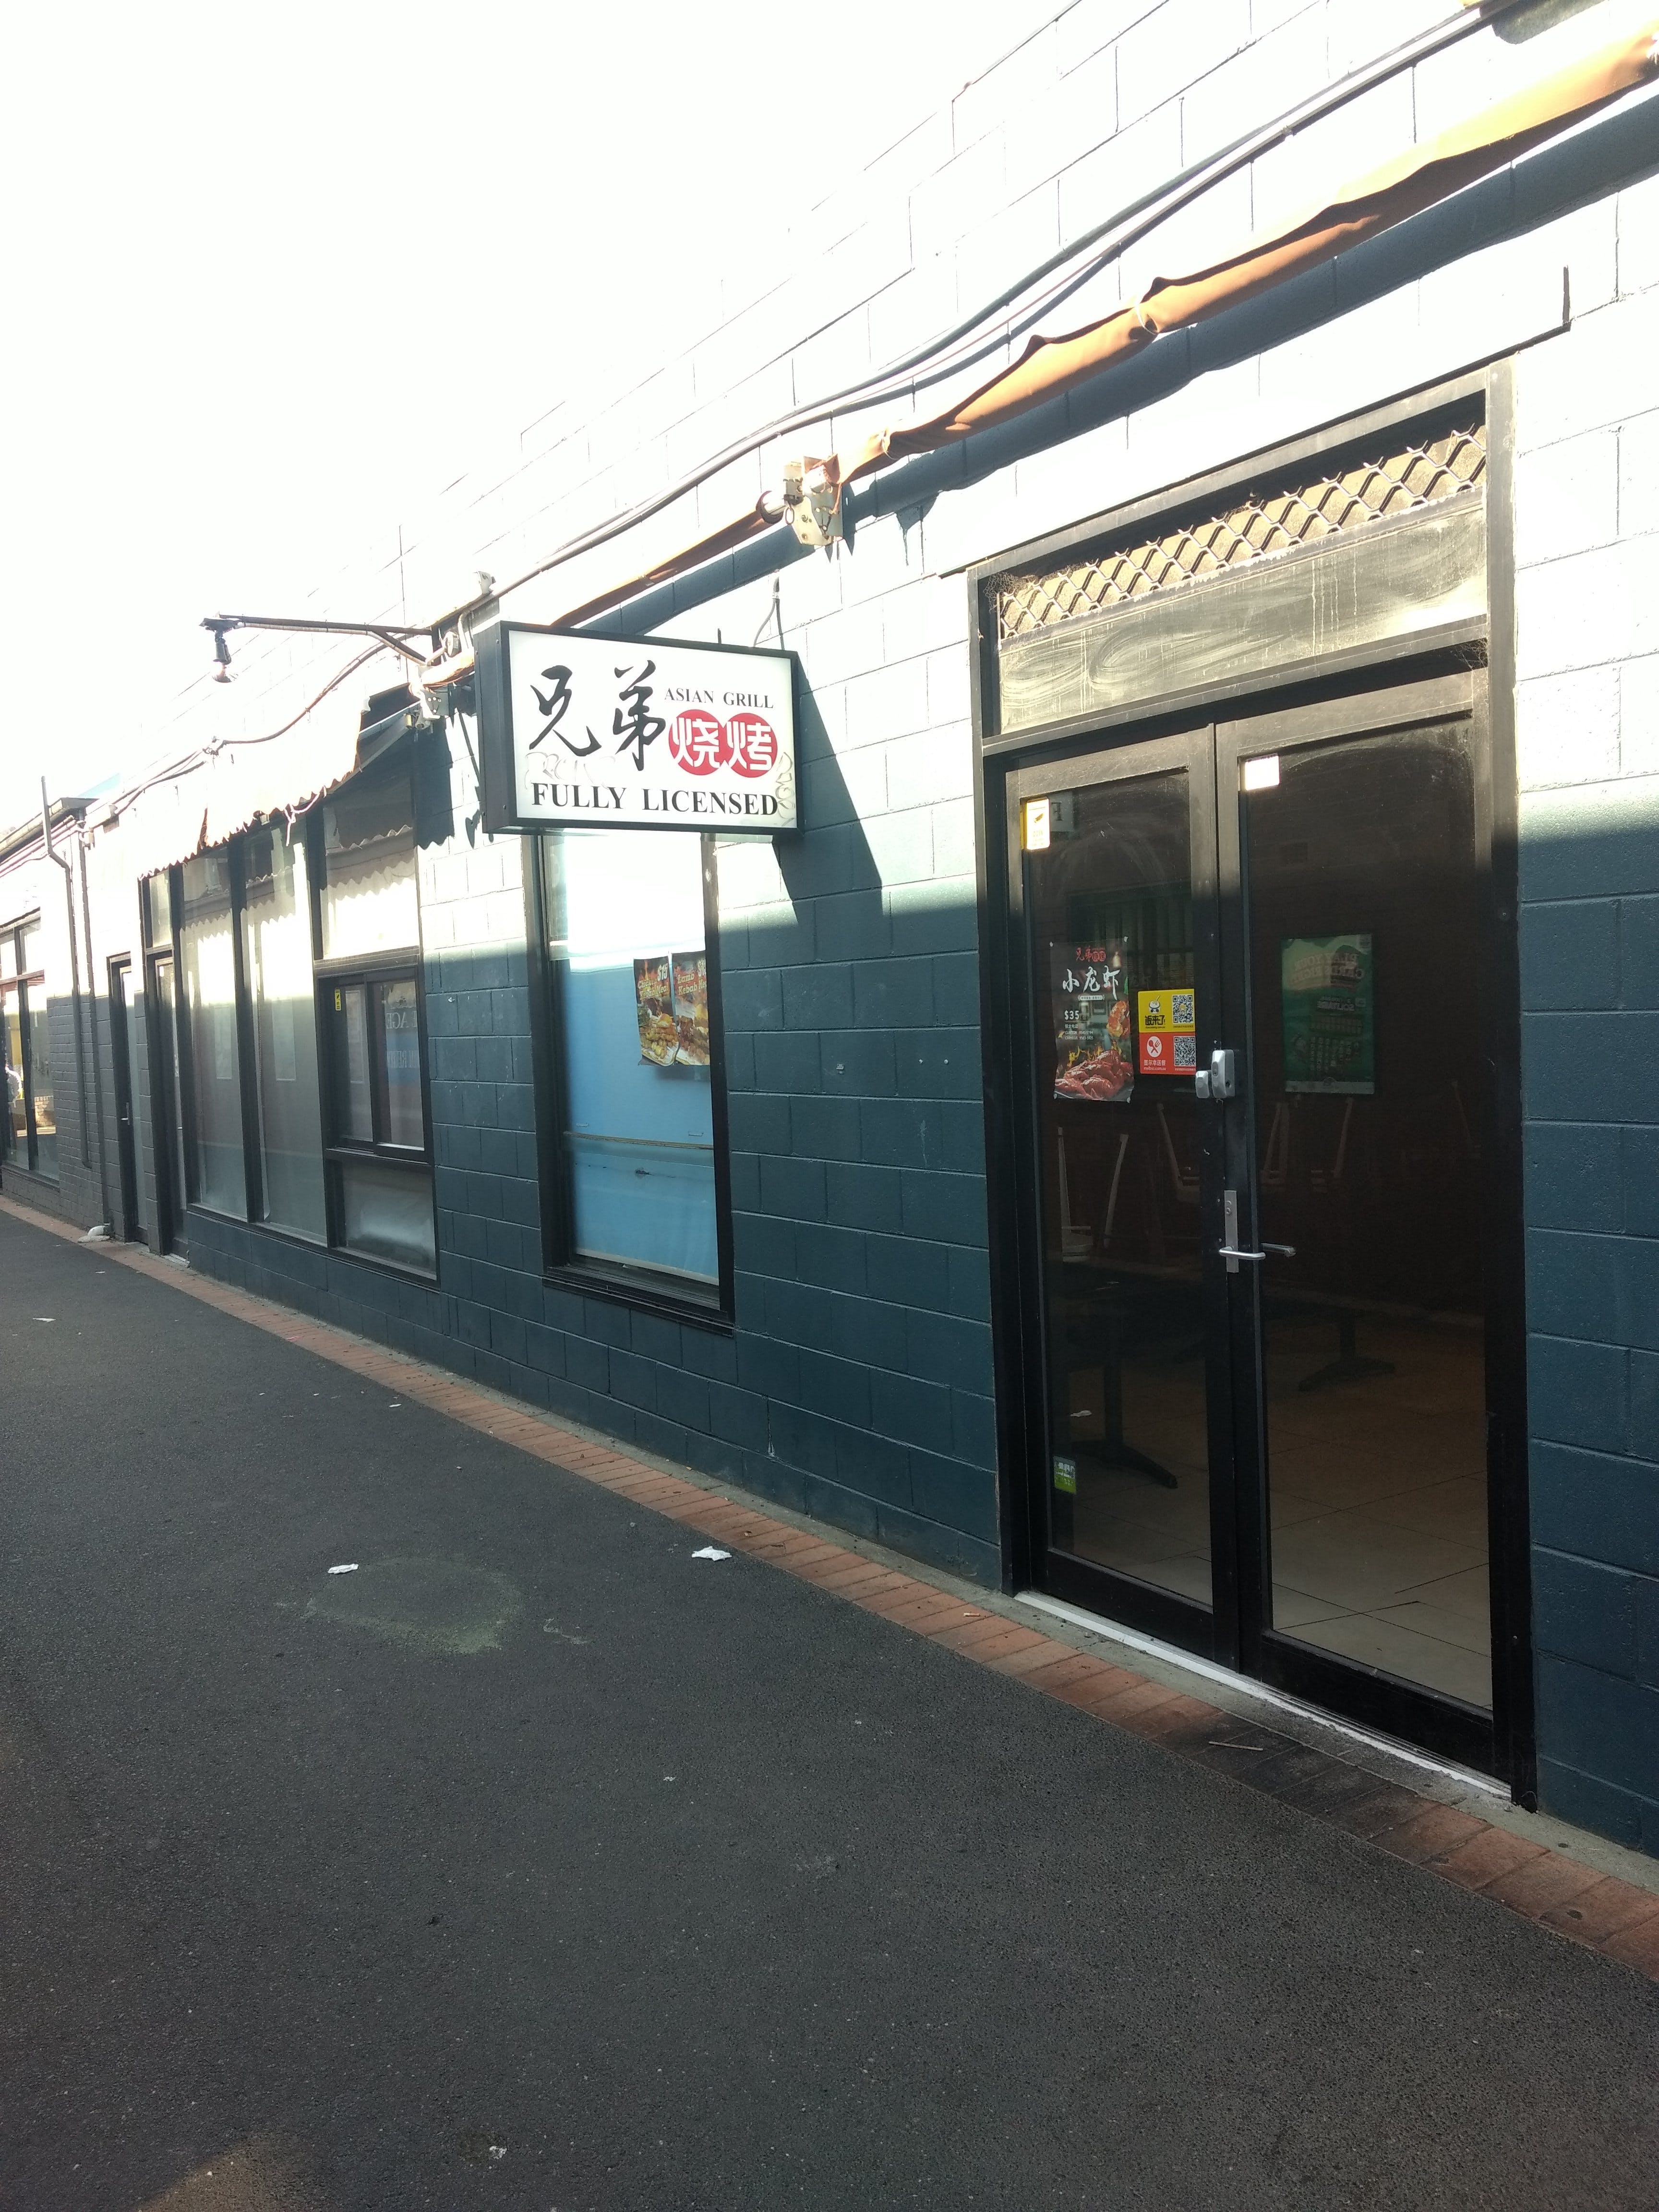 Asian Grill - Port Augusta Accommodation